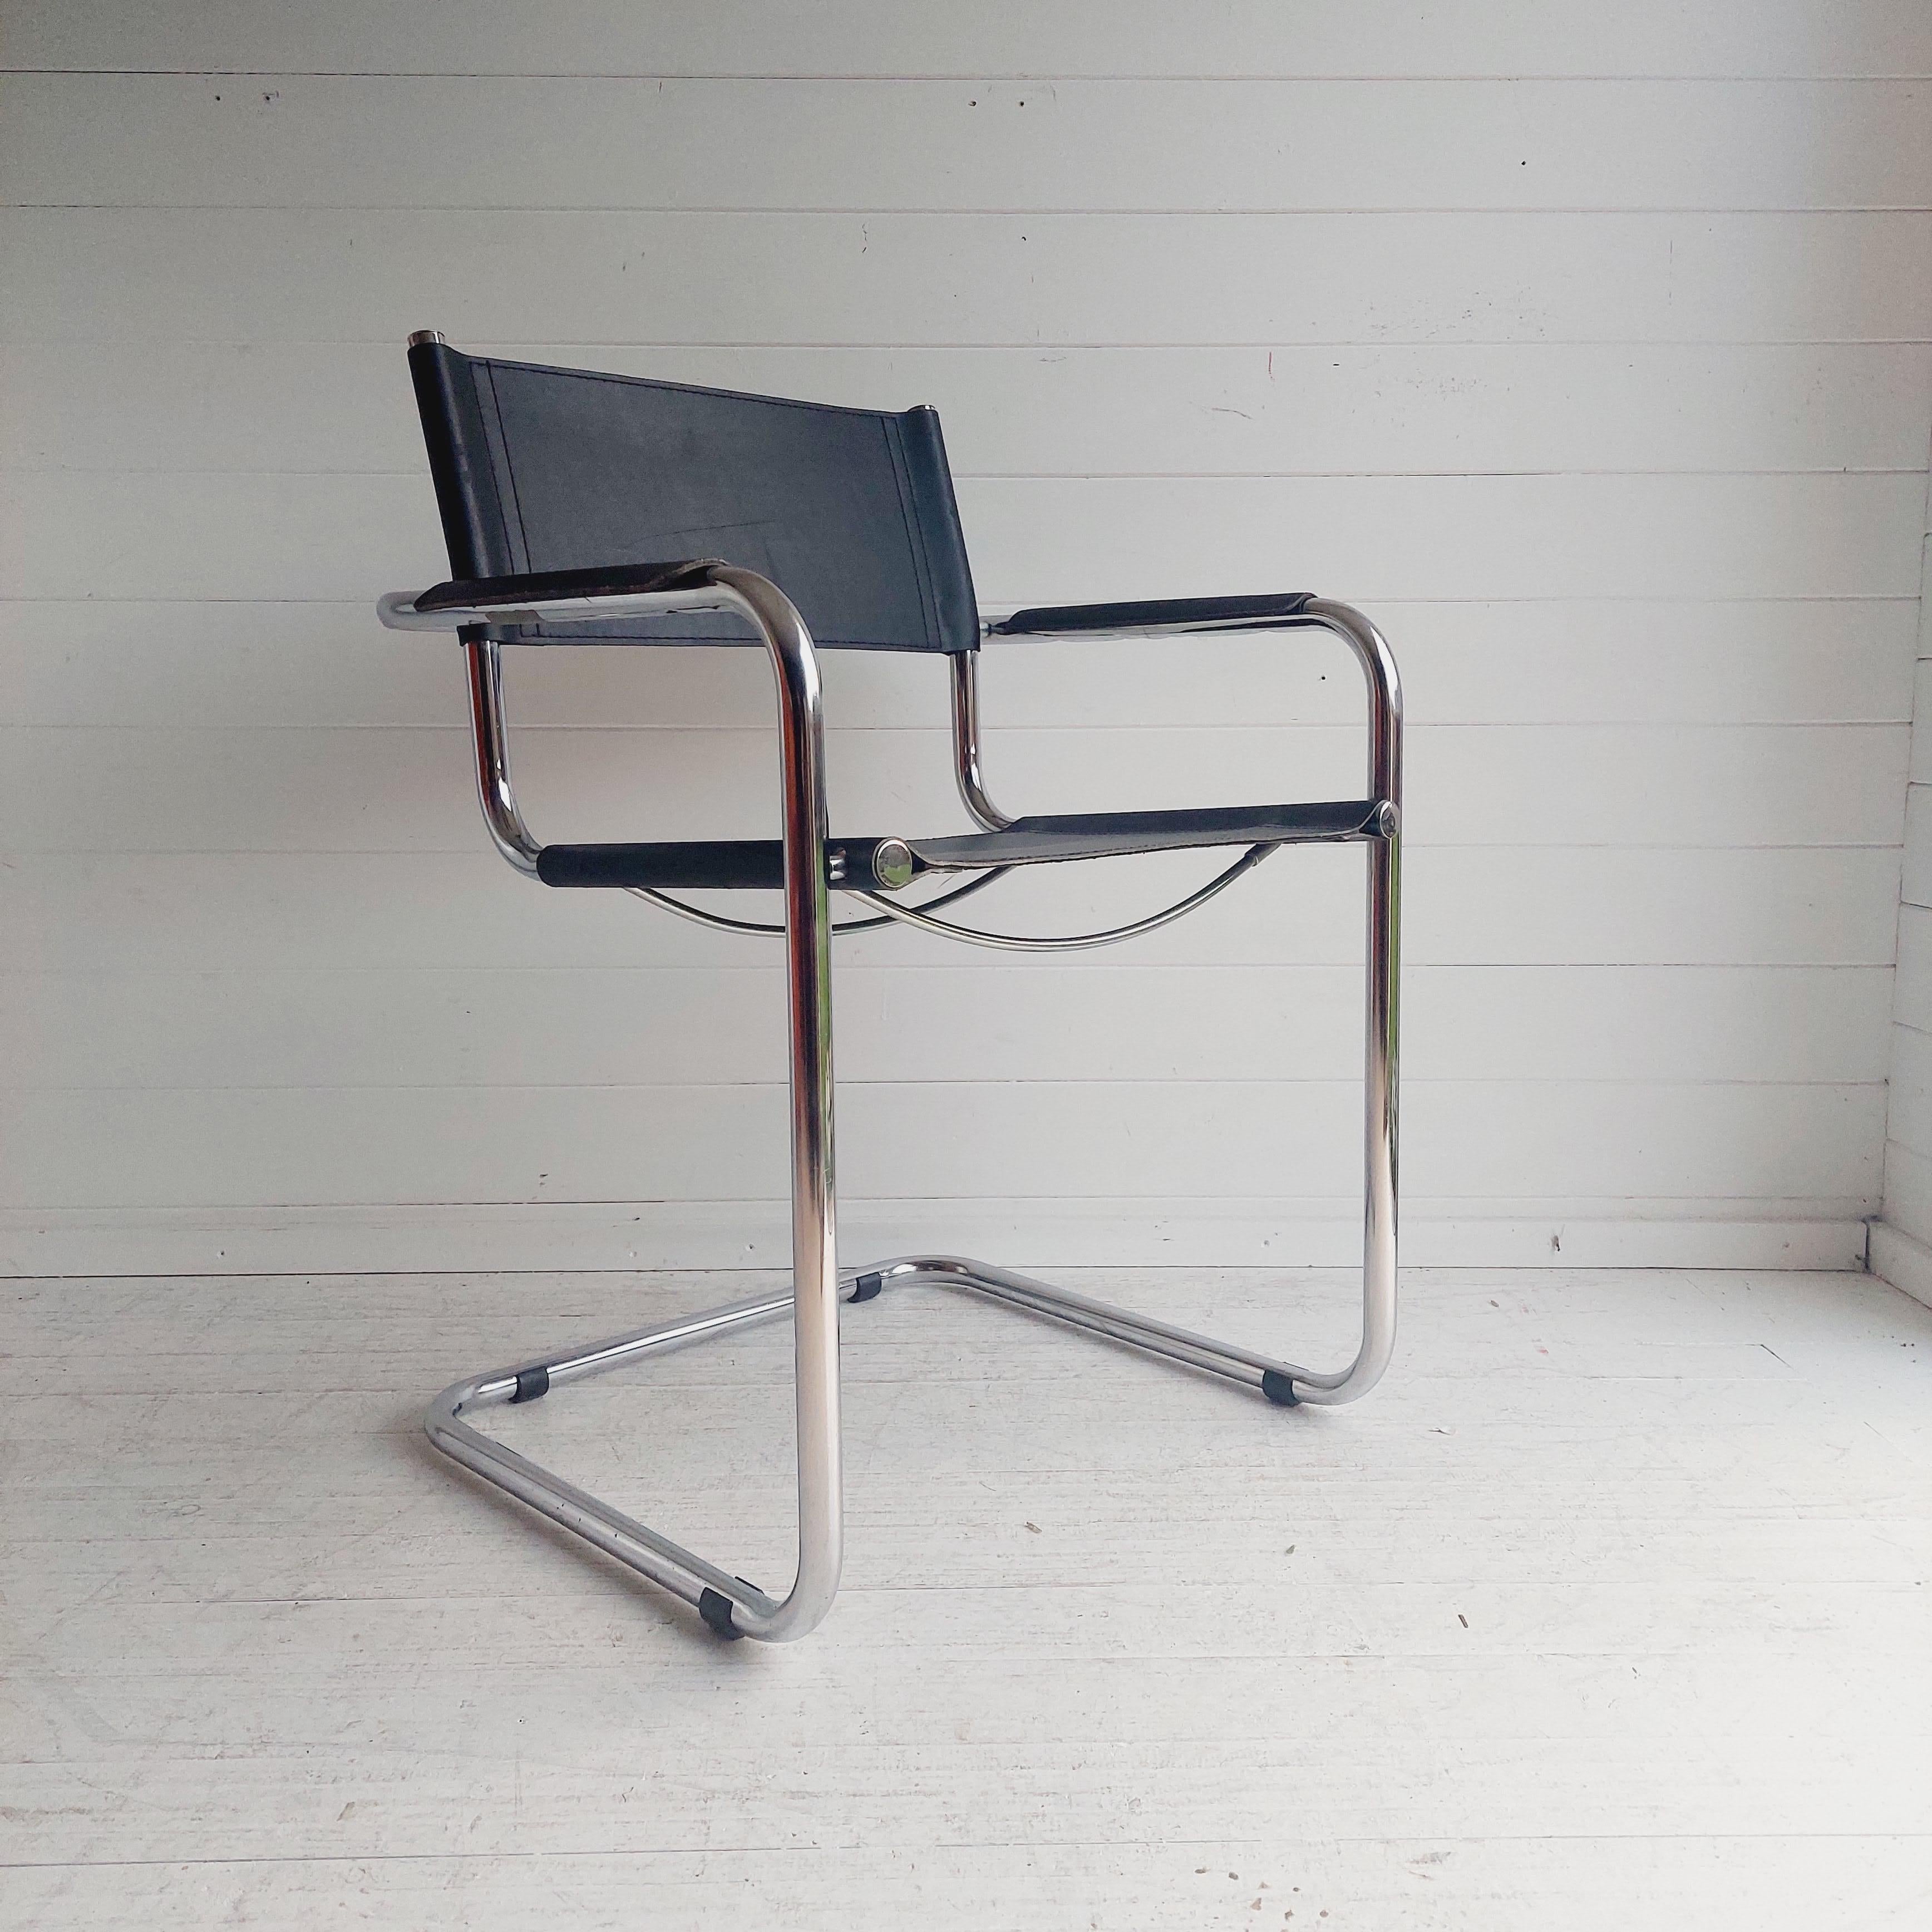 Mid Century iconic Mart Stam S34 armchair / Bauhaus chrome tube steel and leatherette 70/ 80s vintage cantilever chair s43
Marcel Breuer design
An amazing armchair designed by Mart Stam in the 1920s

Vintage Mid Century 1960's/70's Mart Stam Style